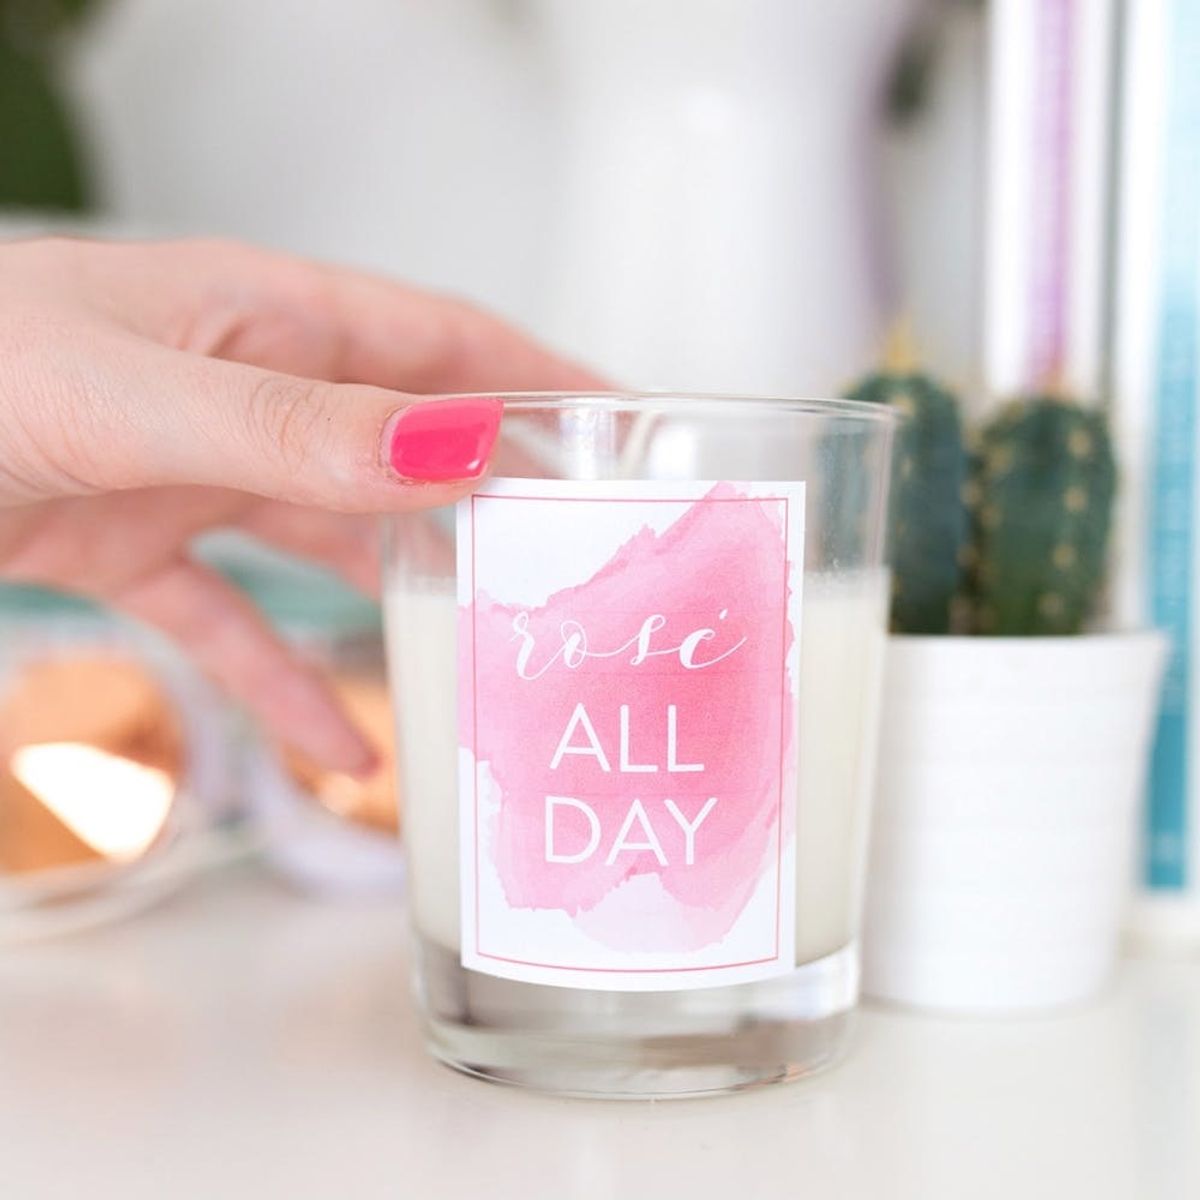 Embrace the Rosé-All-Day Mantra With This Easy DIY Candle